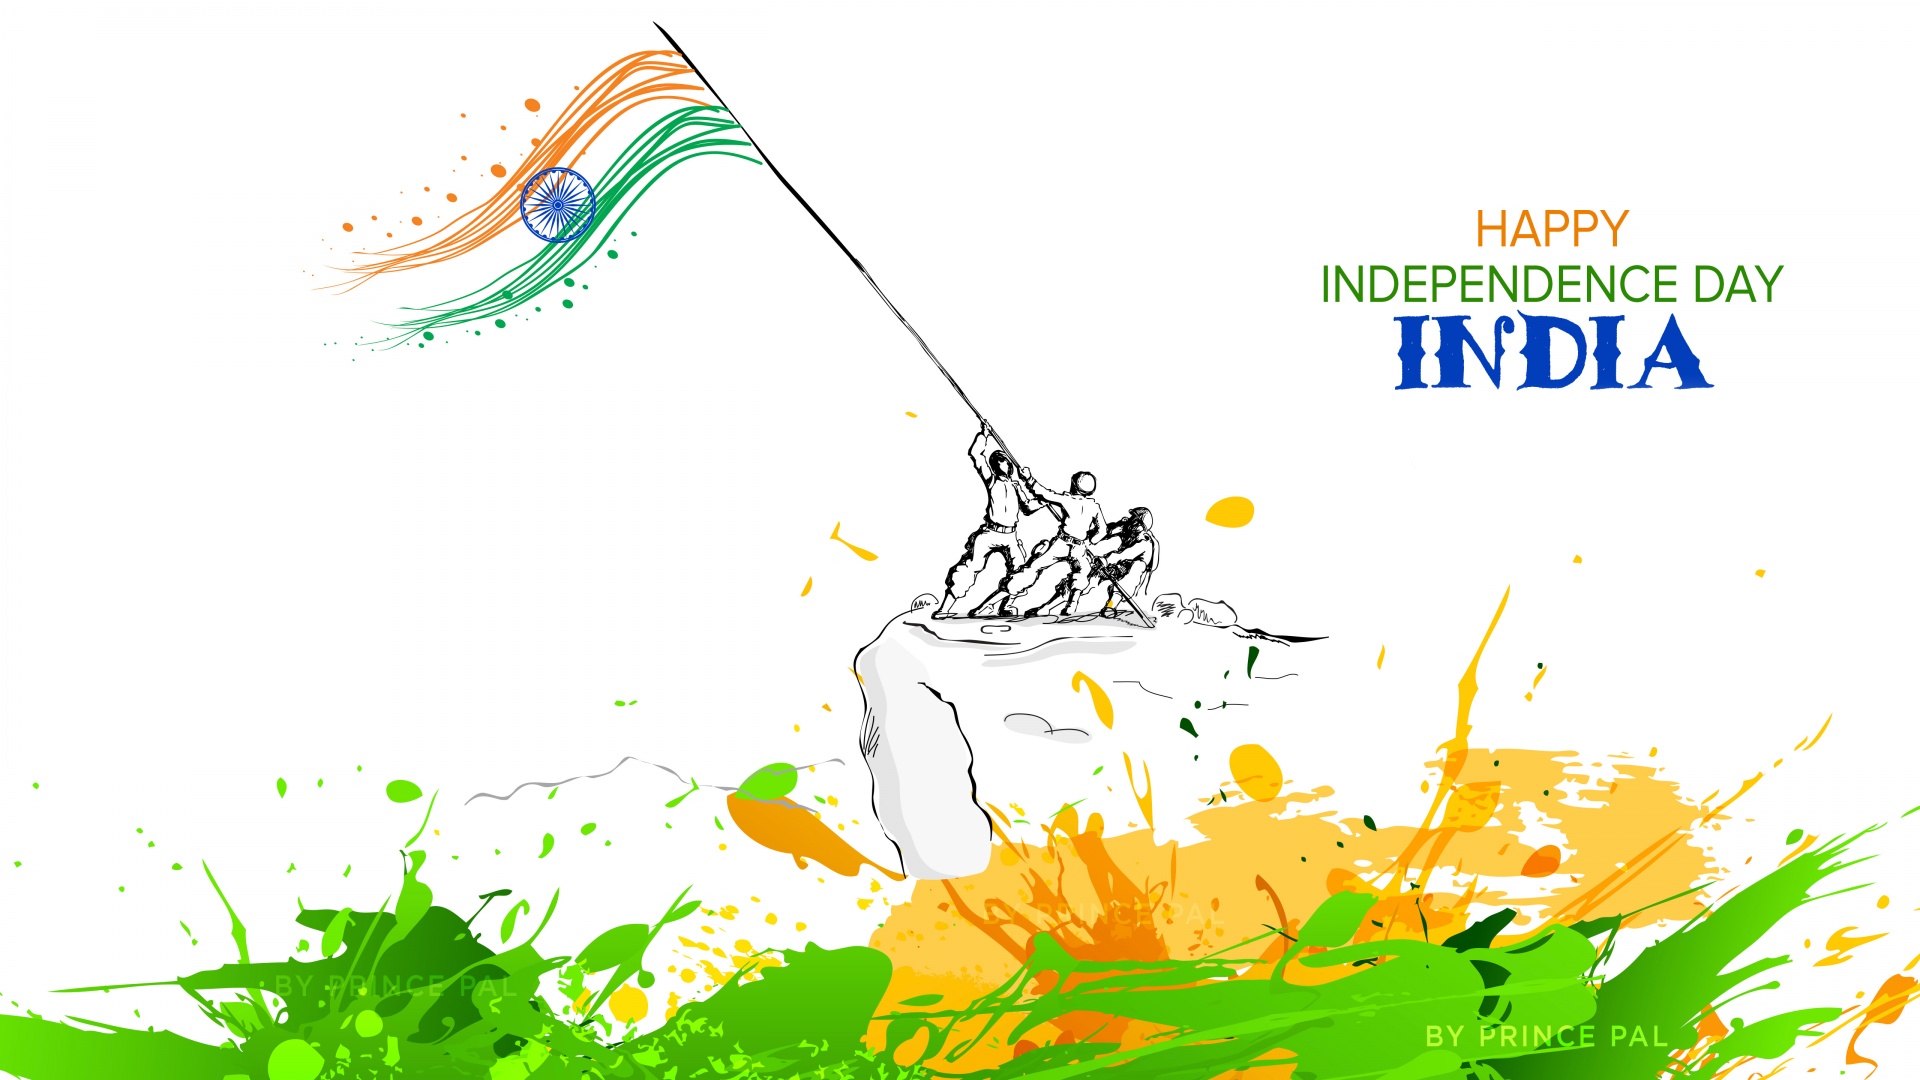 Independence Day Wallpaper 4K, India, August 15th, Celebrations, #2273